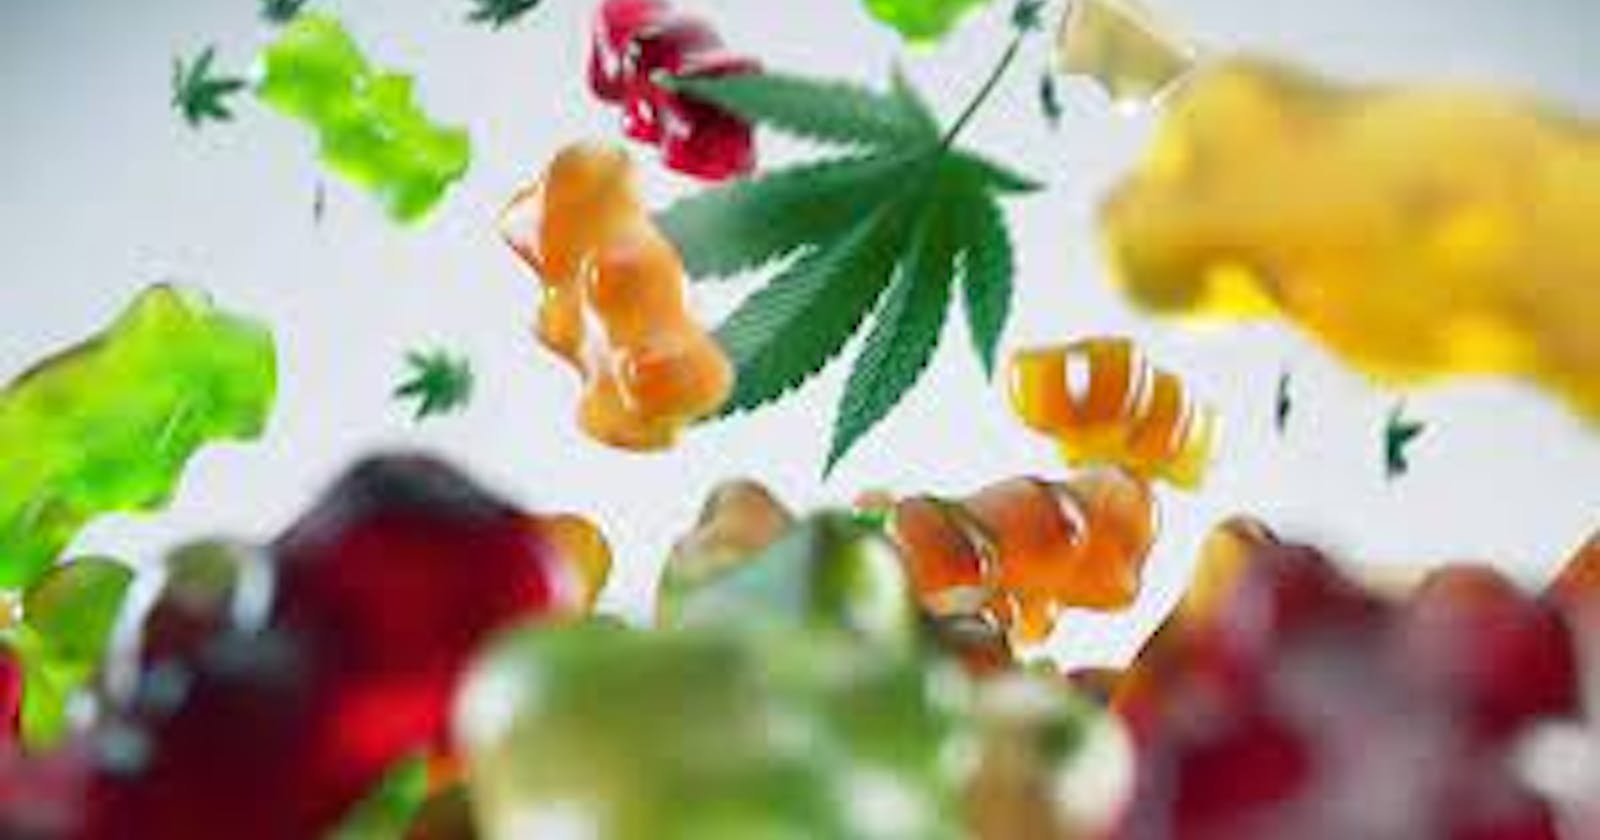 Canna Organic Green CBD Gummies Review: Scam or Should You Buy?